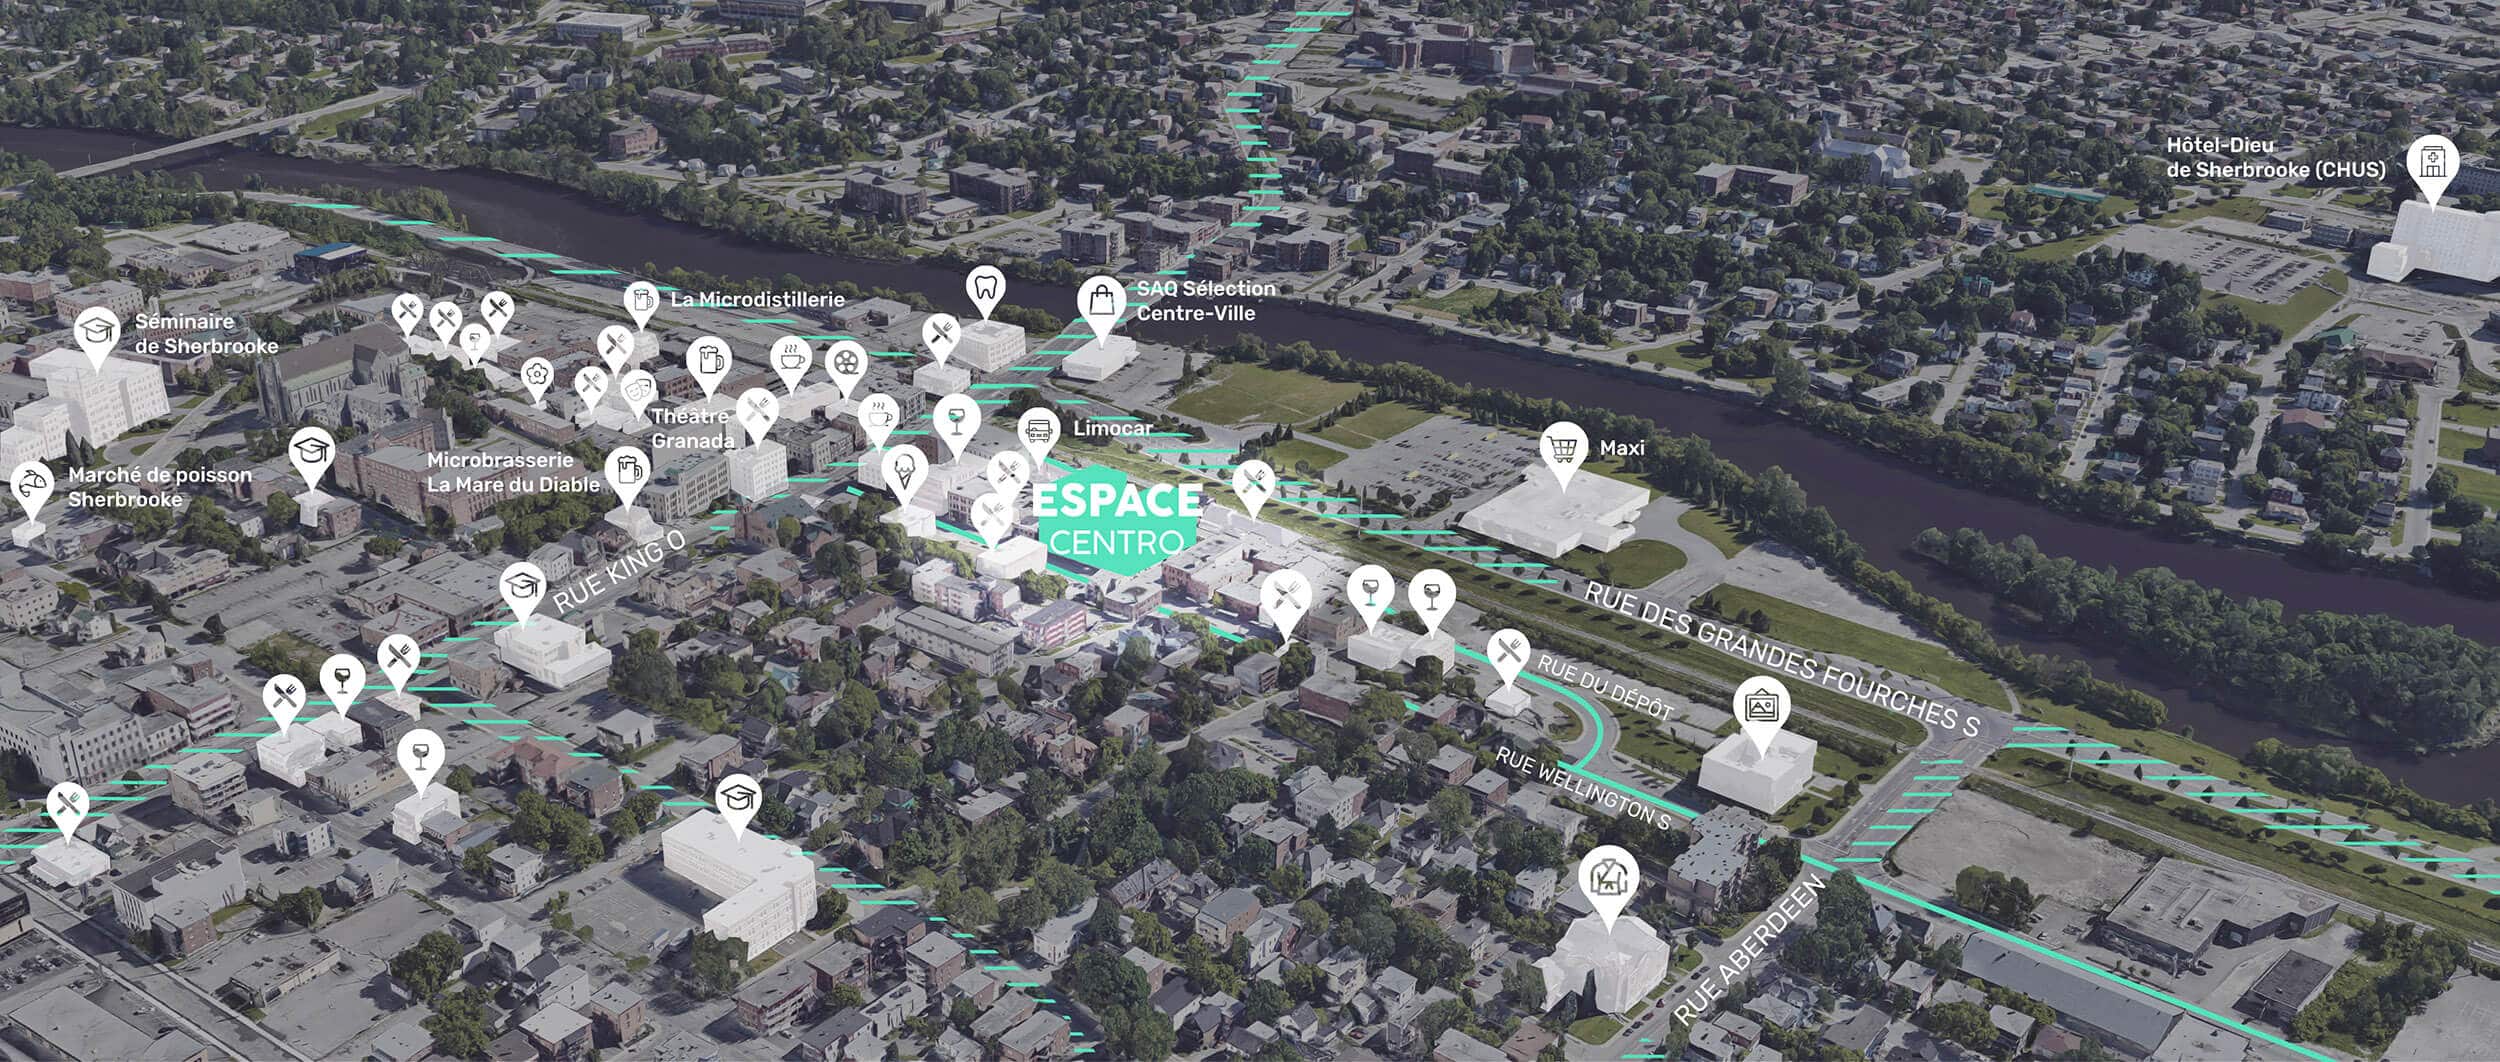 Location map for Espace Centro on Wellington Street in Sherbrooke